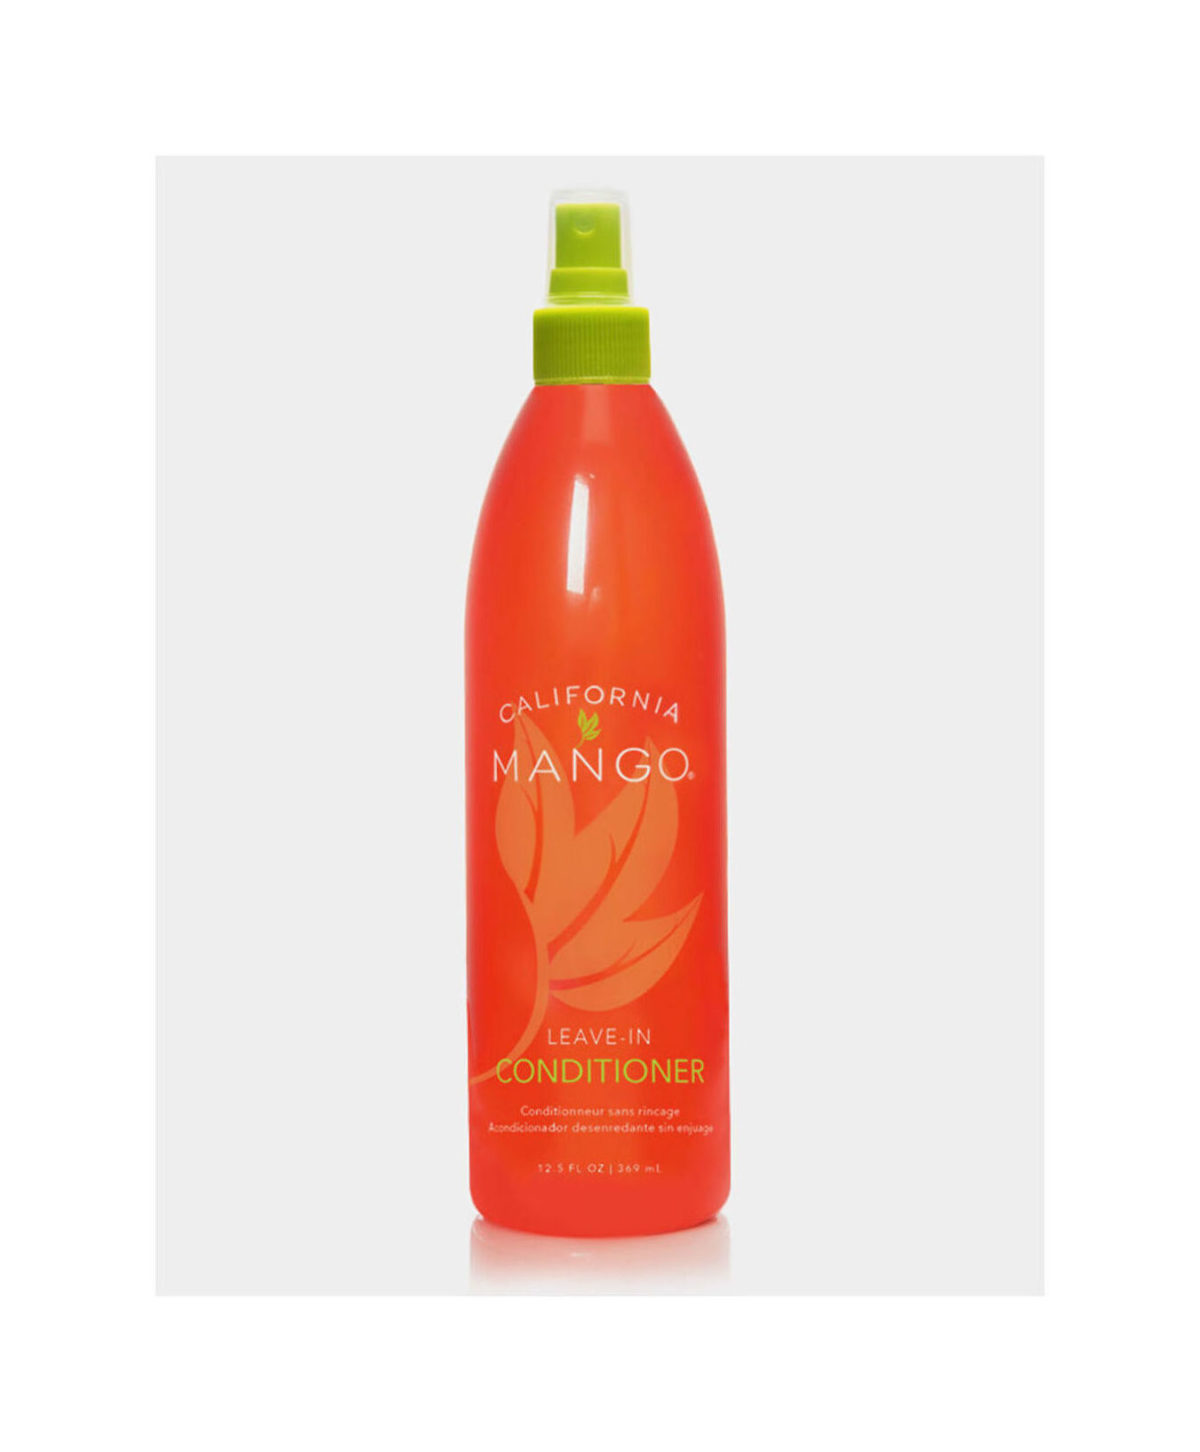 California Mango - Leave in conditioner 369ml Ohmykajo curly hair care, hair loss treatment, curly hair products California Mango - Leave in conditioner